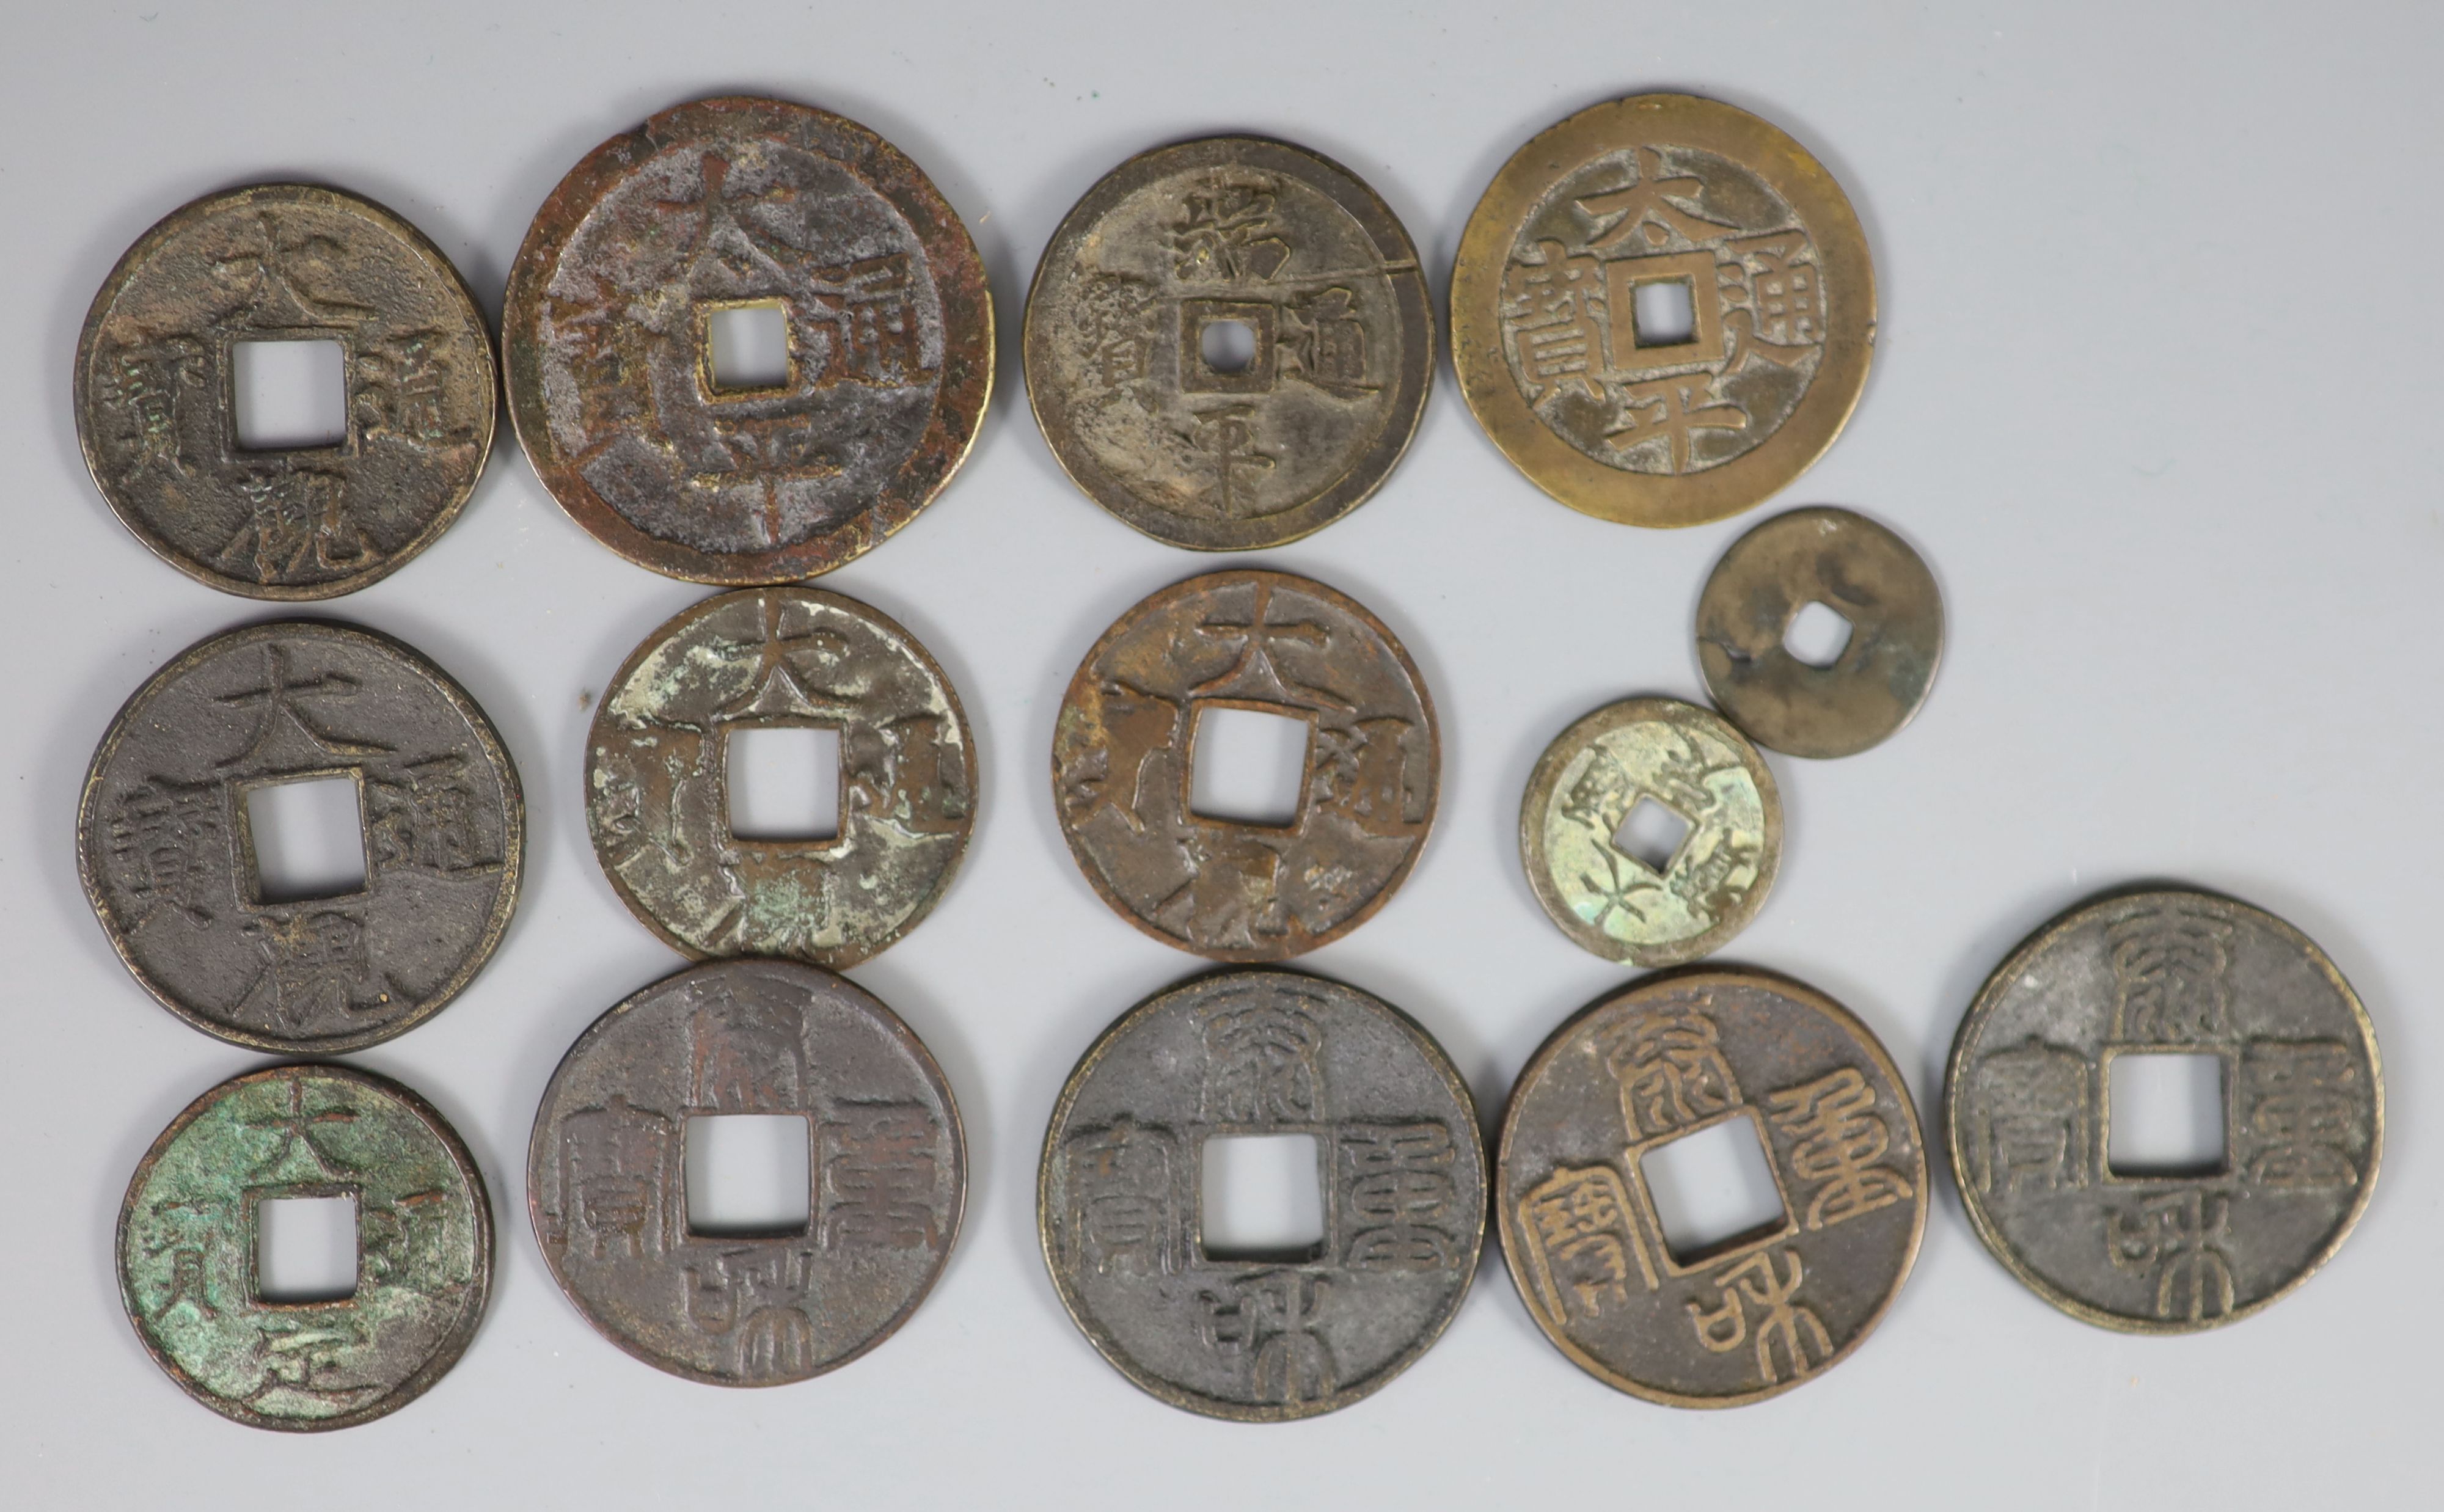 China, a group of 14 bronze coin charms or amulets, Qing dynasty,